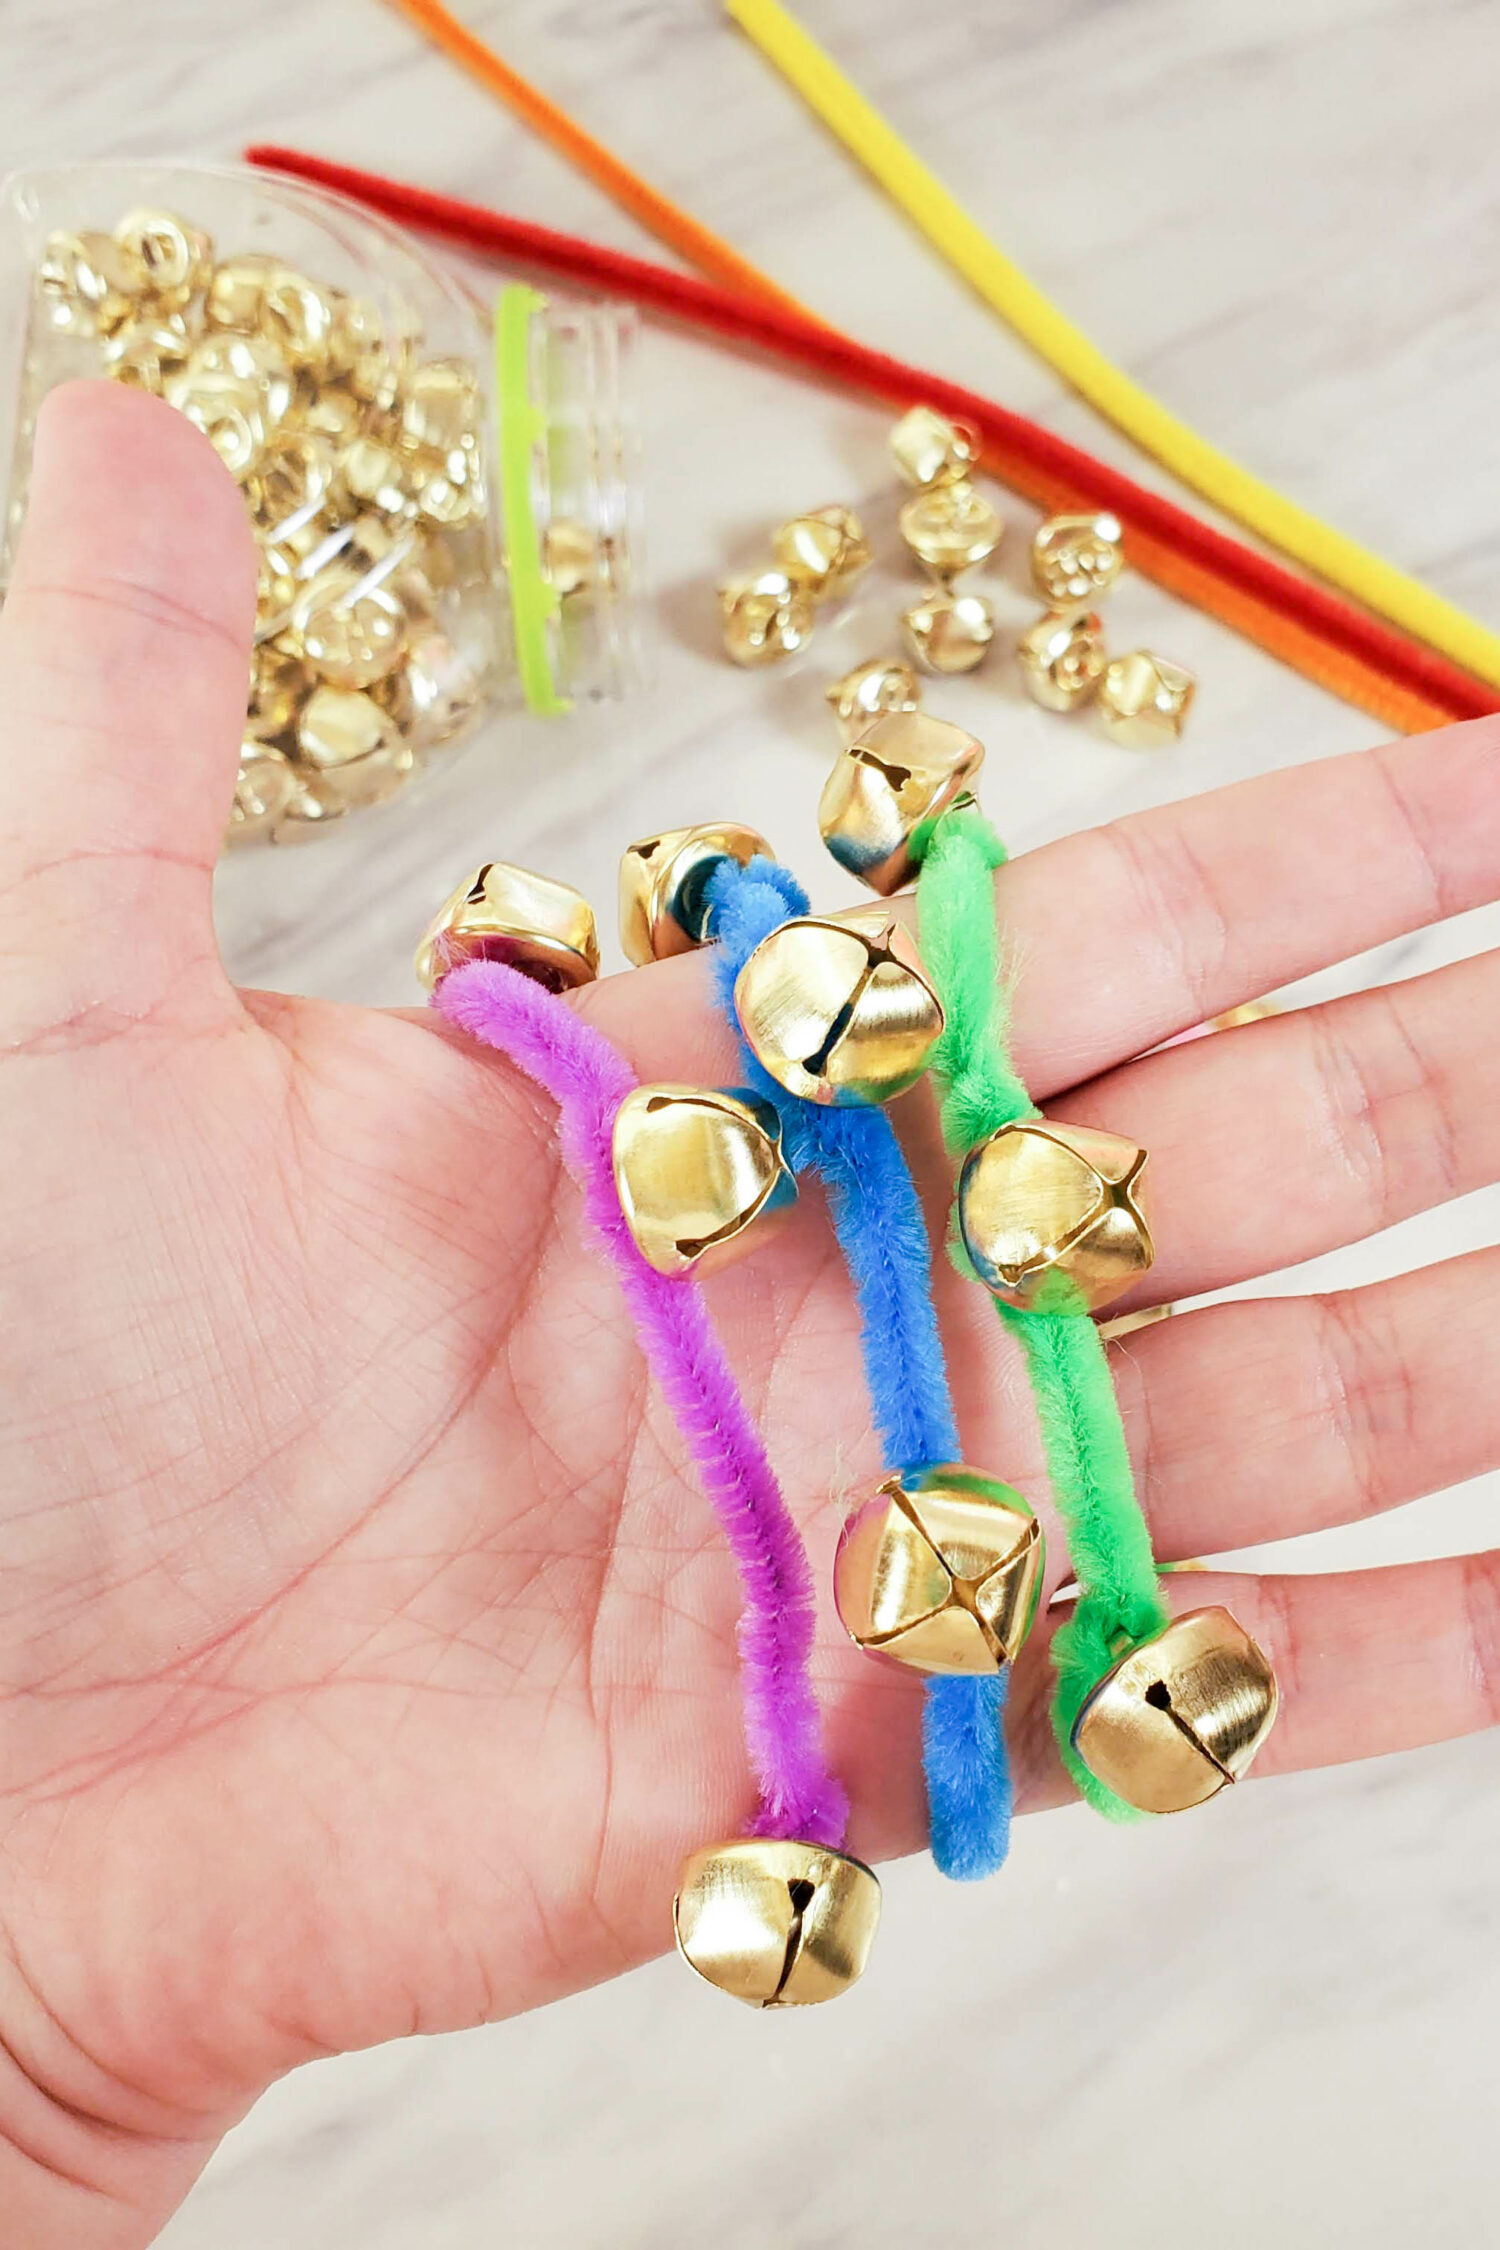 How to Make Jingle Bell Bracelets easy and inexpensive step-by-step tutorial with lots of directions, ideas for using them in singing time, and even a tip on how to hold the wrist bands!! Great ideas for music teachers and LDS Primary Music Leaders or even as a fun at home craft for preschoolers and homeschool children.